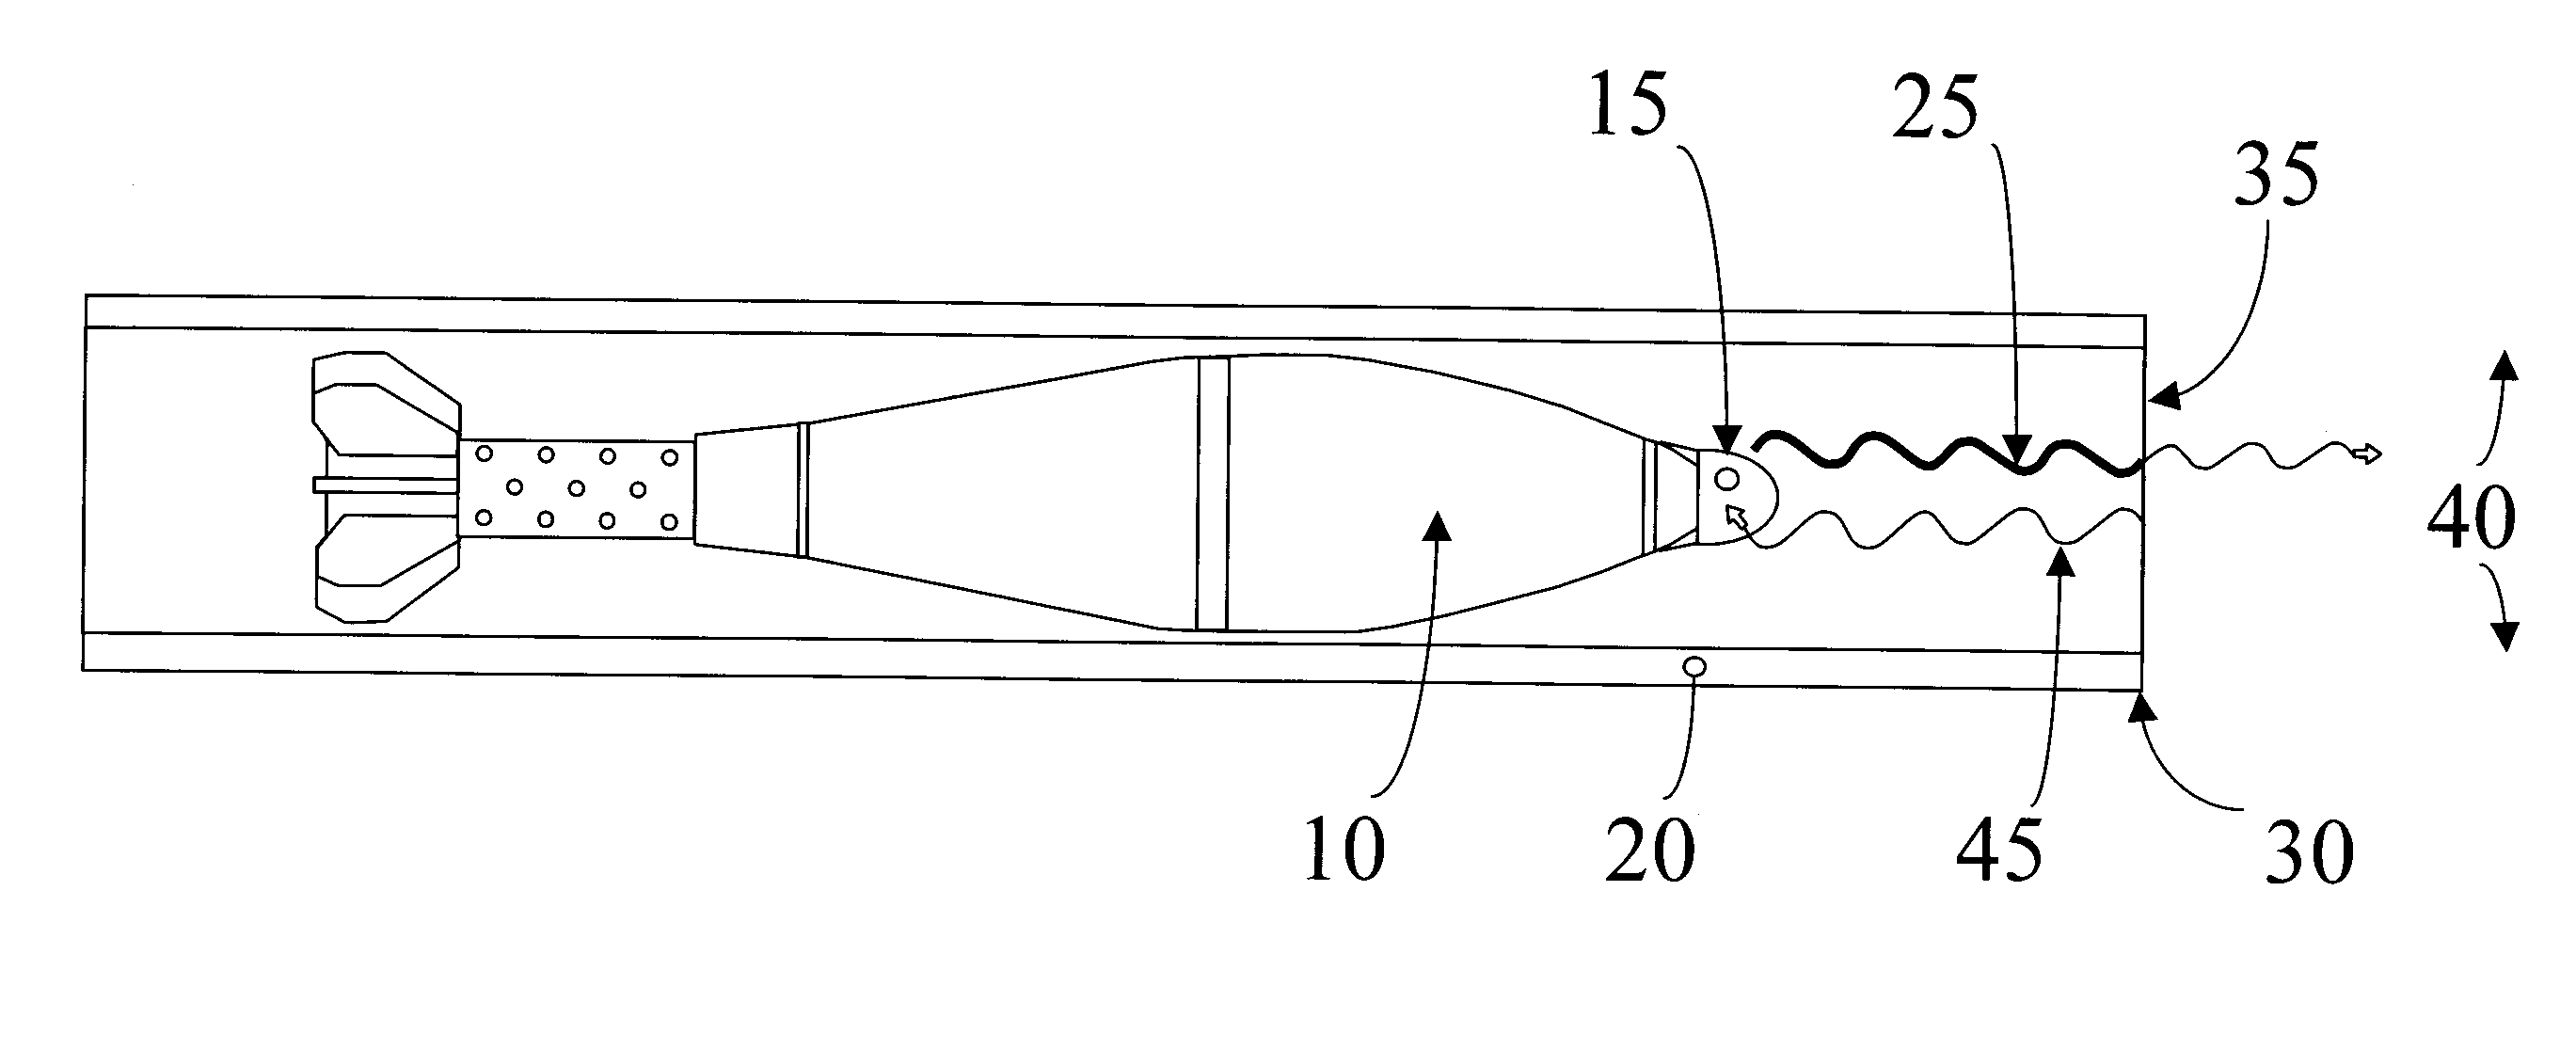 Projectile launch detection system utilizing a continuous wave radio frequency signal to confirm muzzle exit